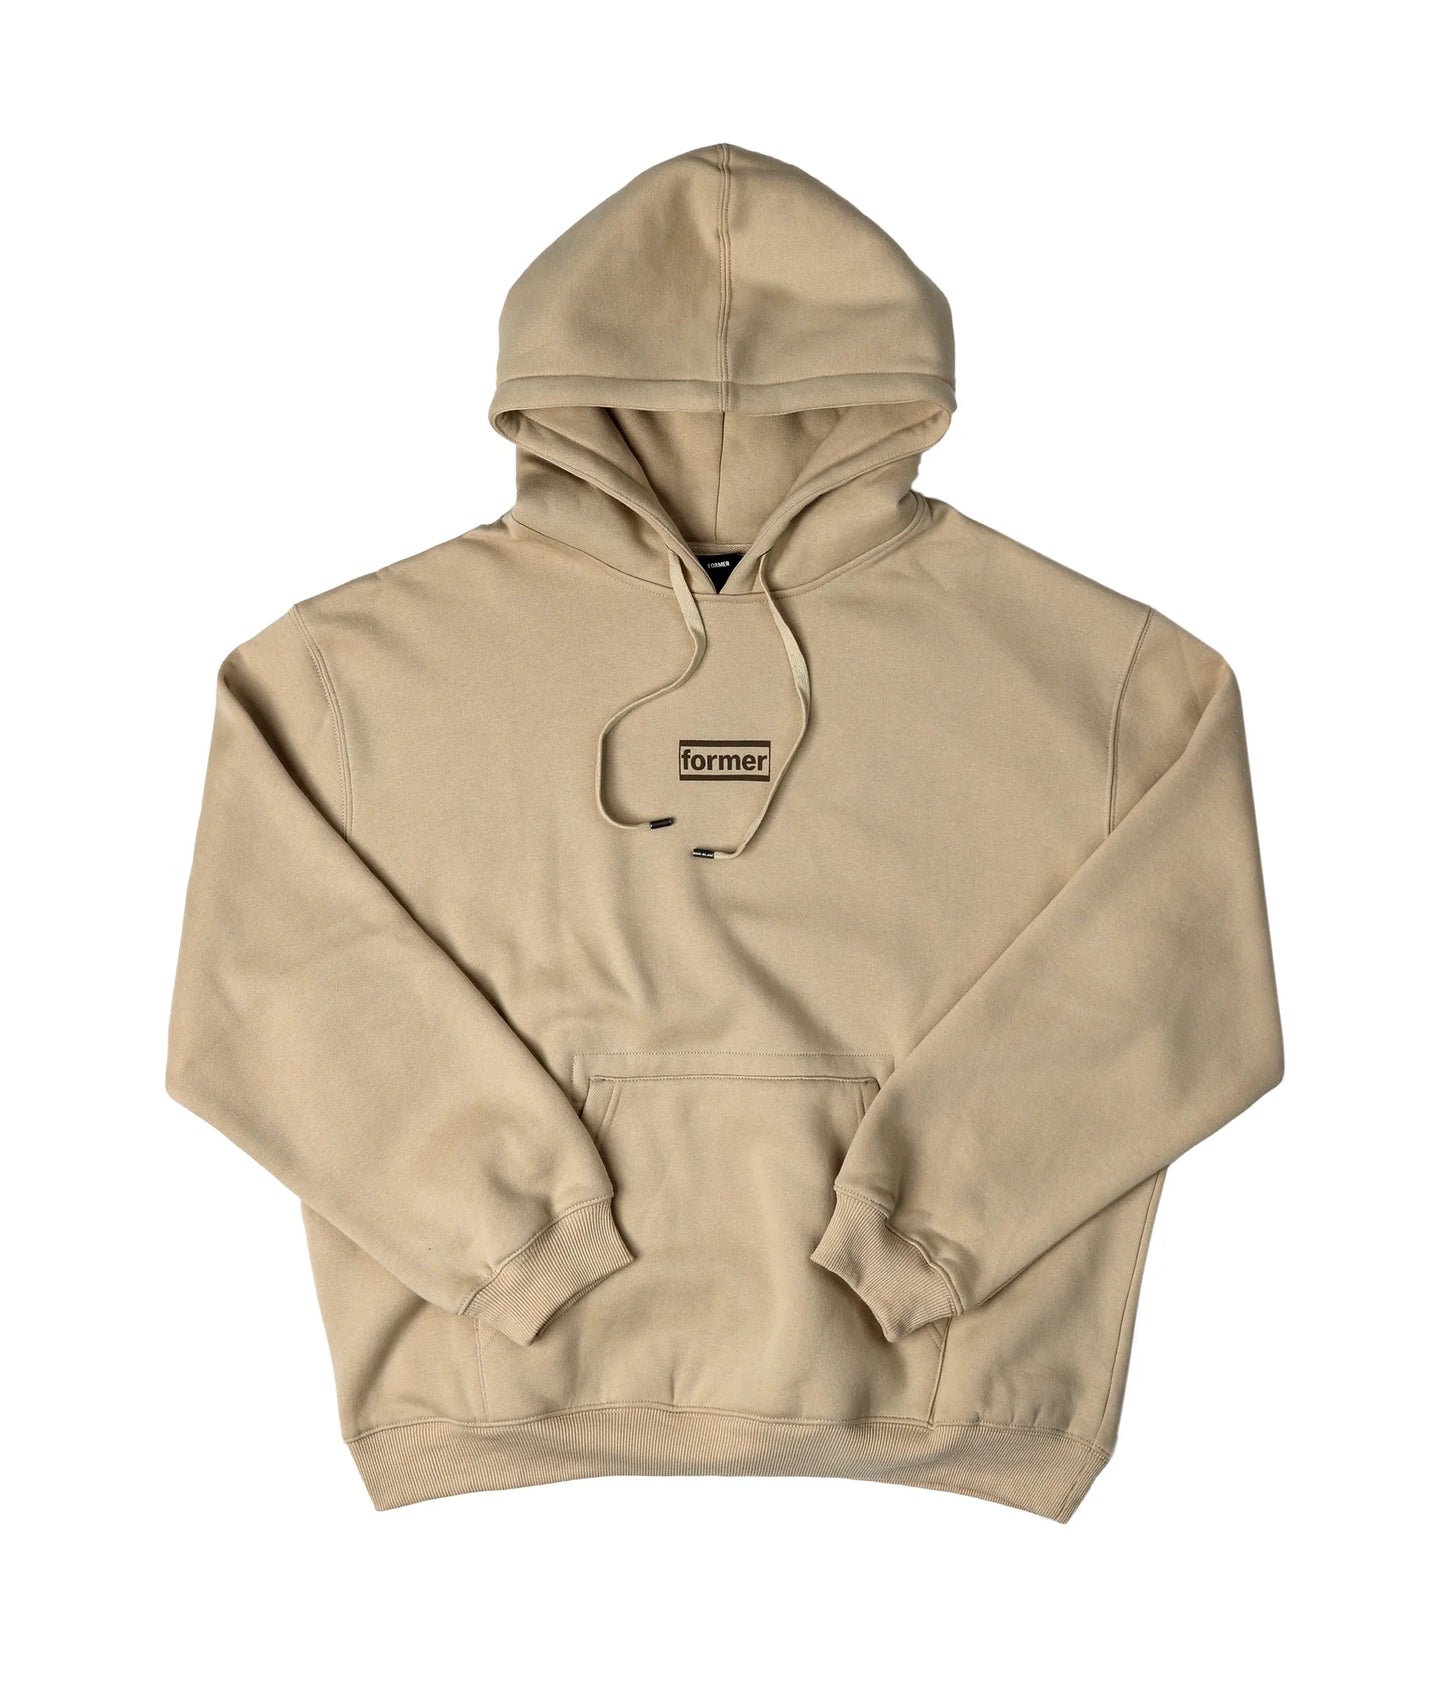 Former Evident Hoodie - Stone